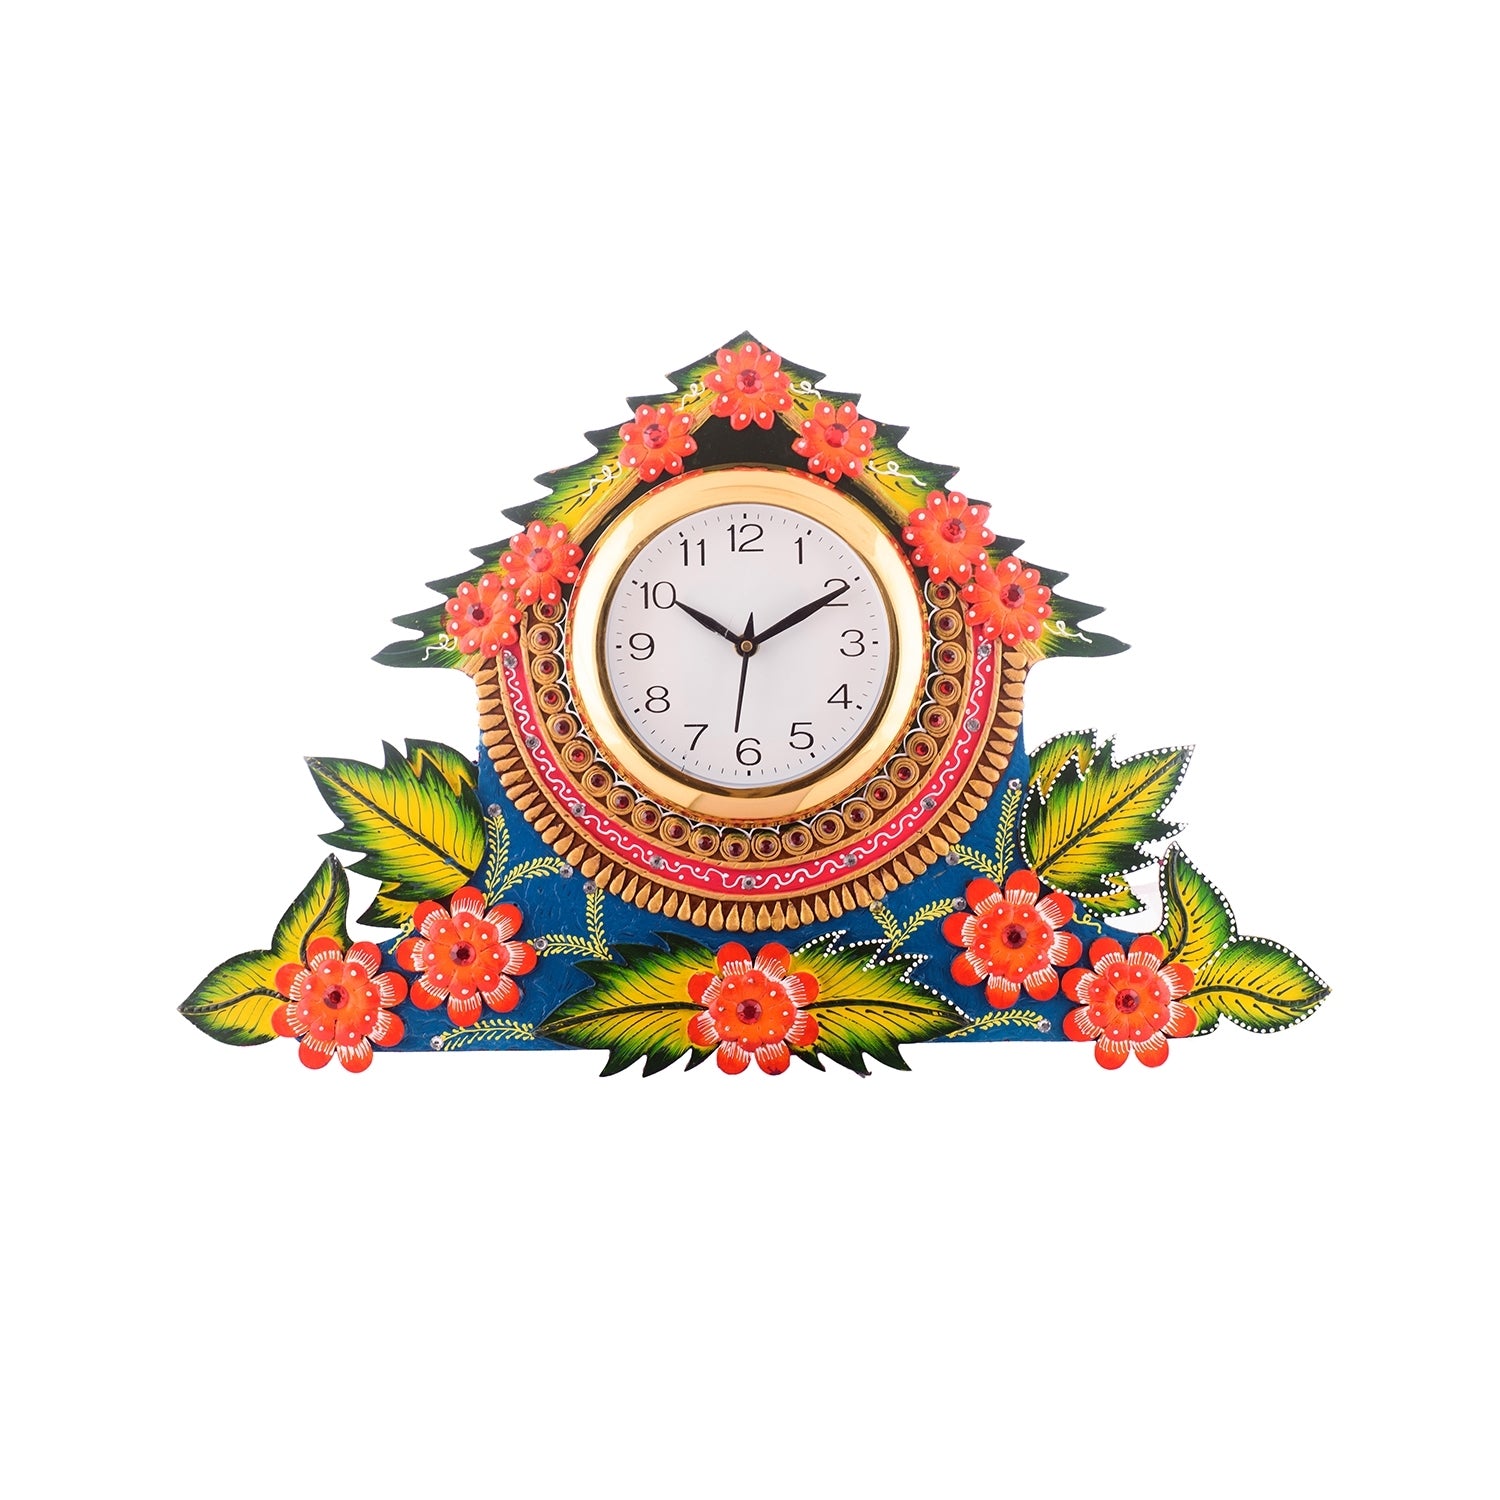 Splendid Floral Wooden Handcrafted Wooden Wall Clock (H - 19 Inch)